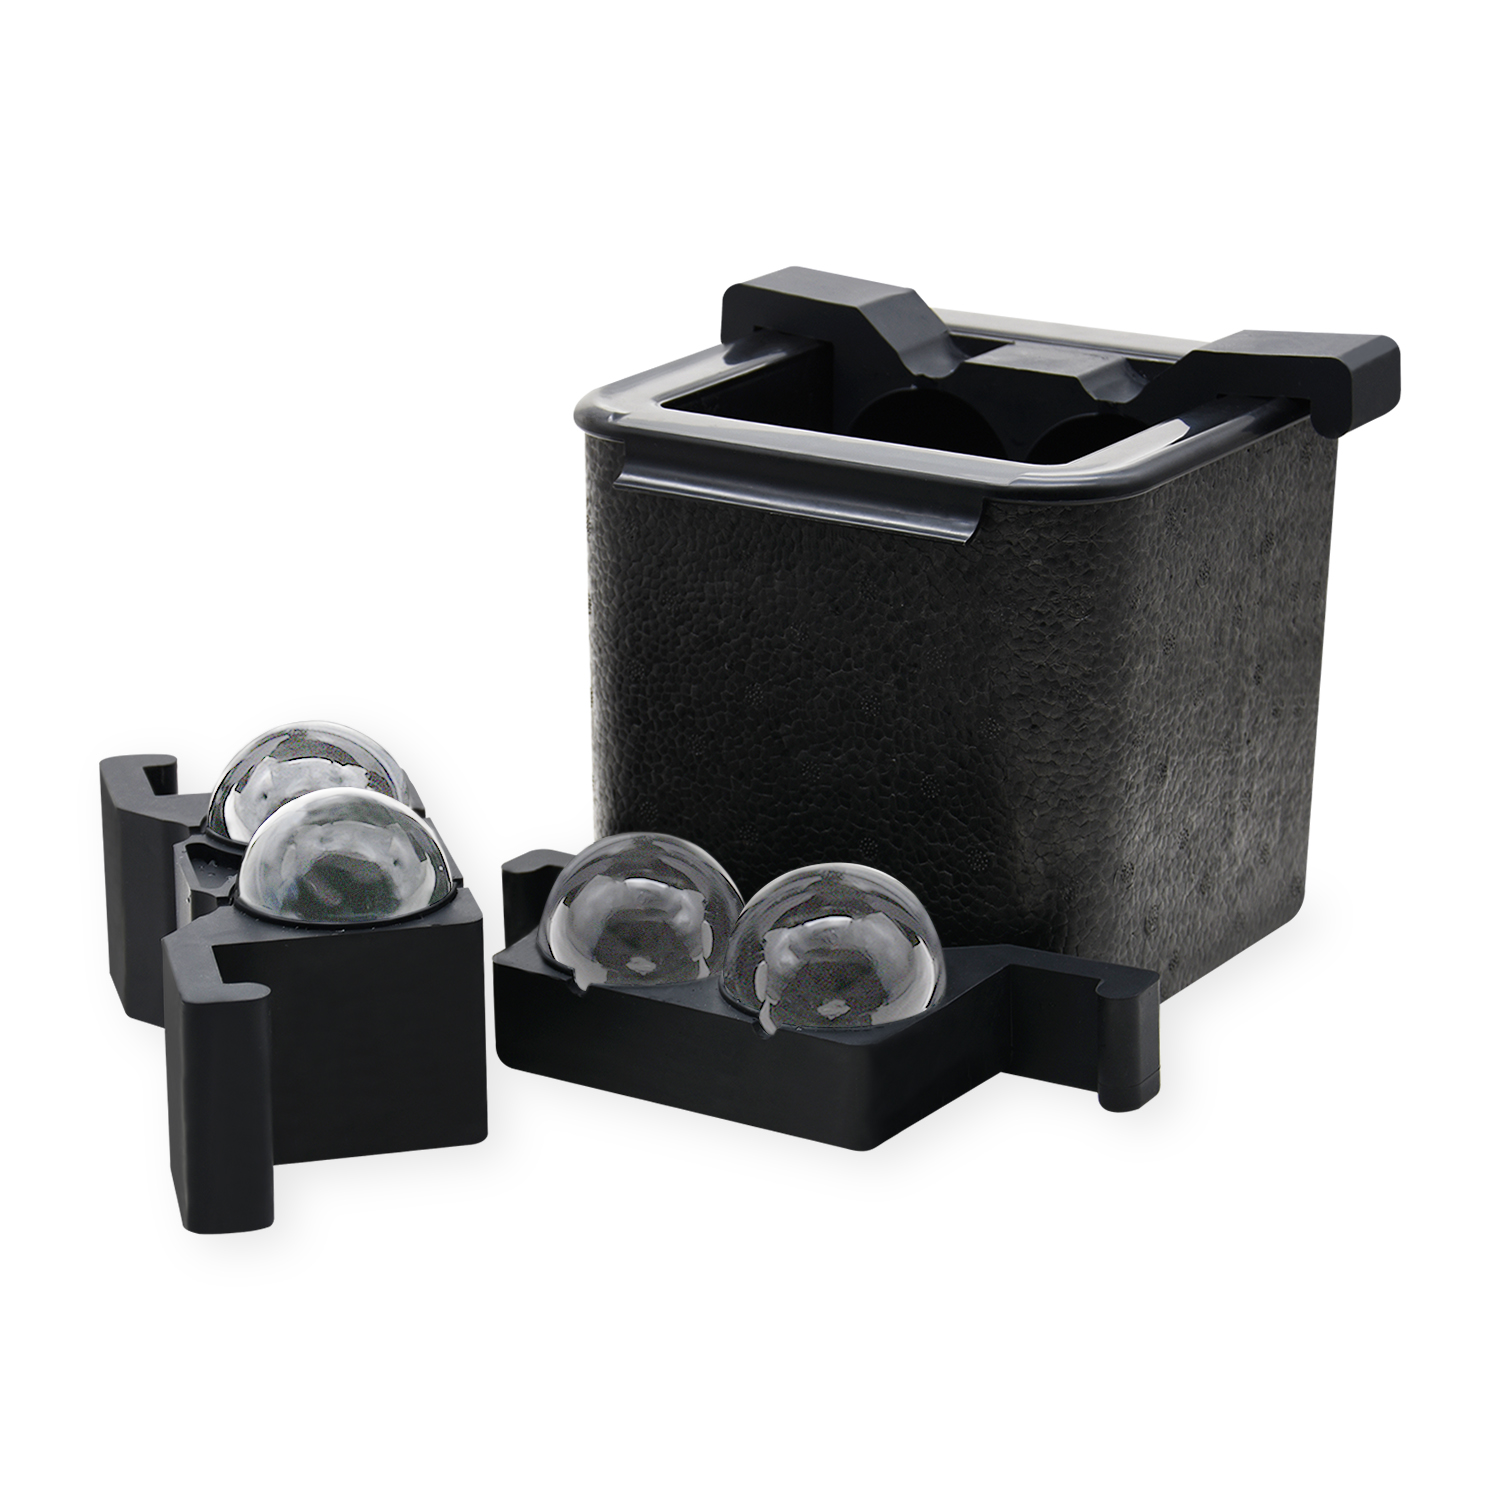 Clearsphere System Ice Ball Maker – The Whiskey Ball